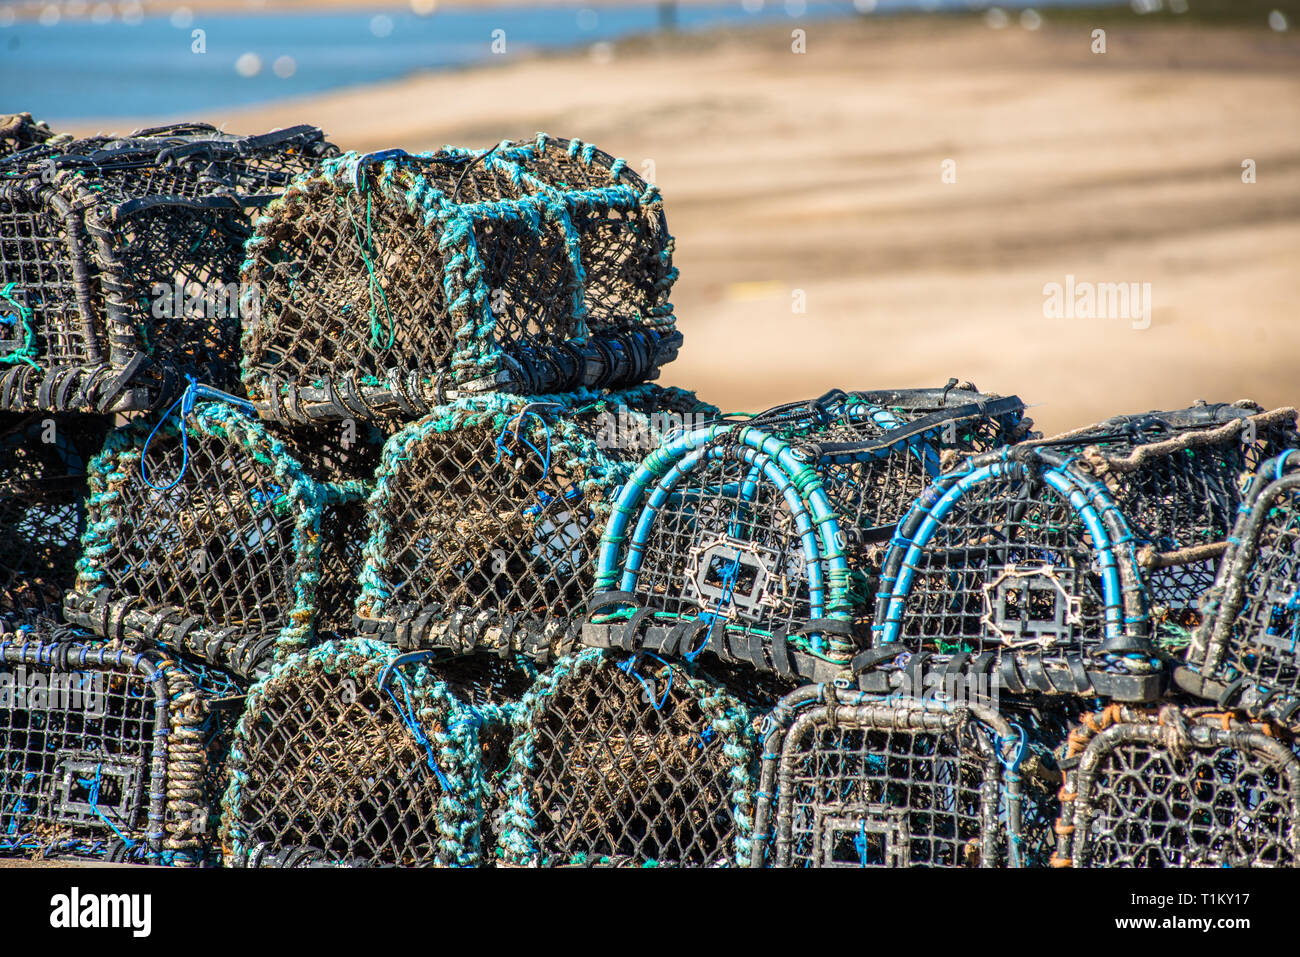 Crab and lobster pots or creels stacked on Wells-next-the-sea seafront. North Norfolk coast, East Anglia, England, UK. Stock Photo